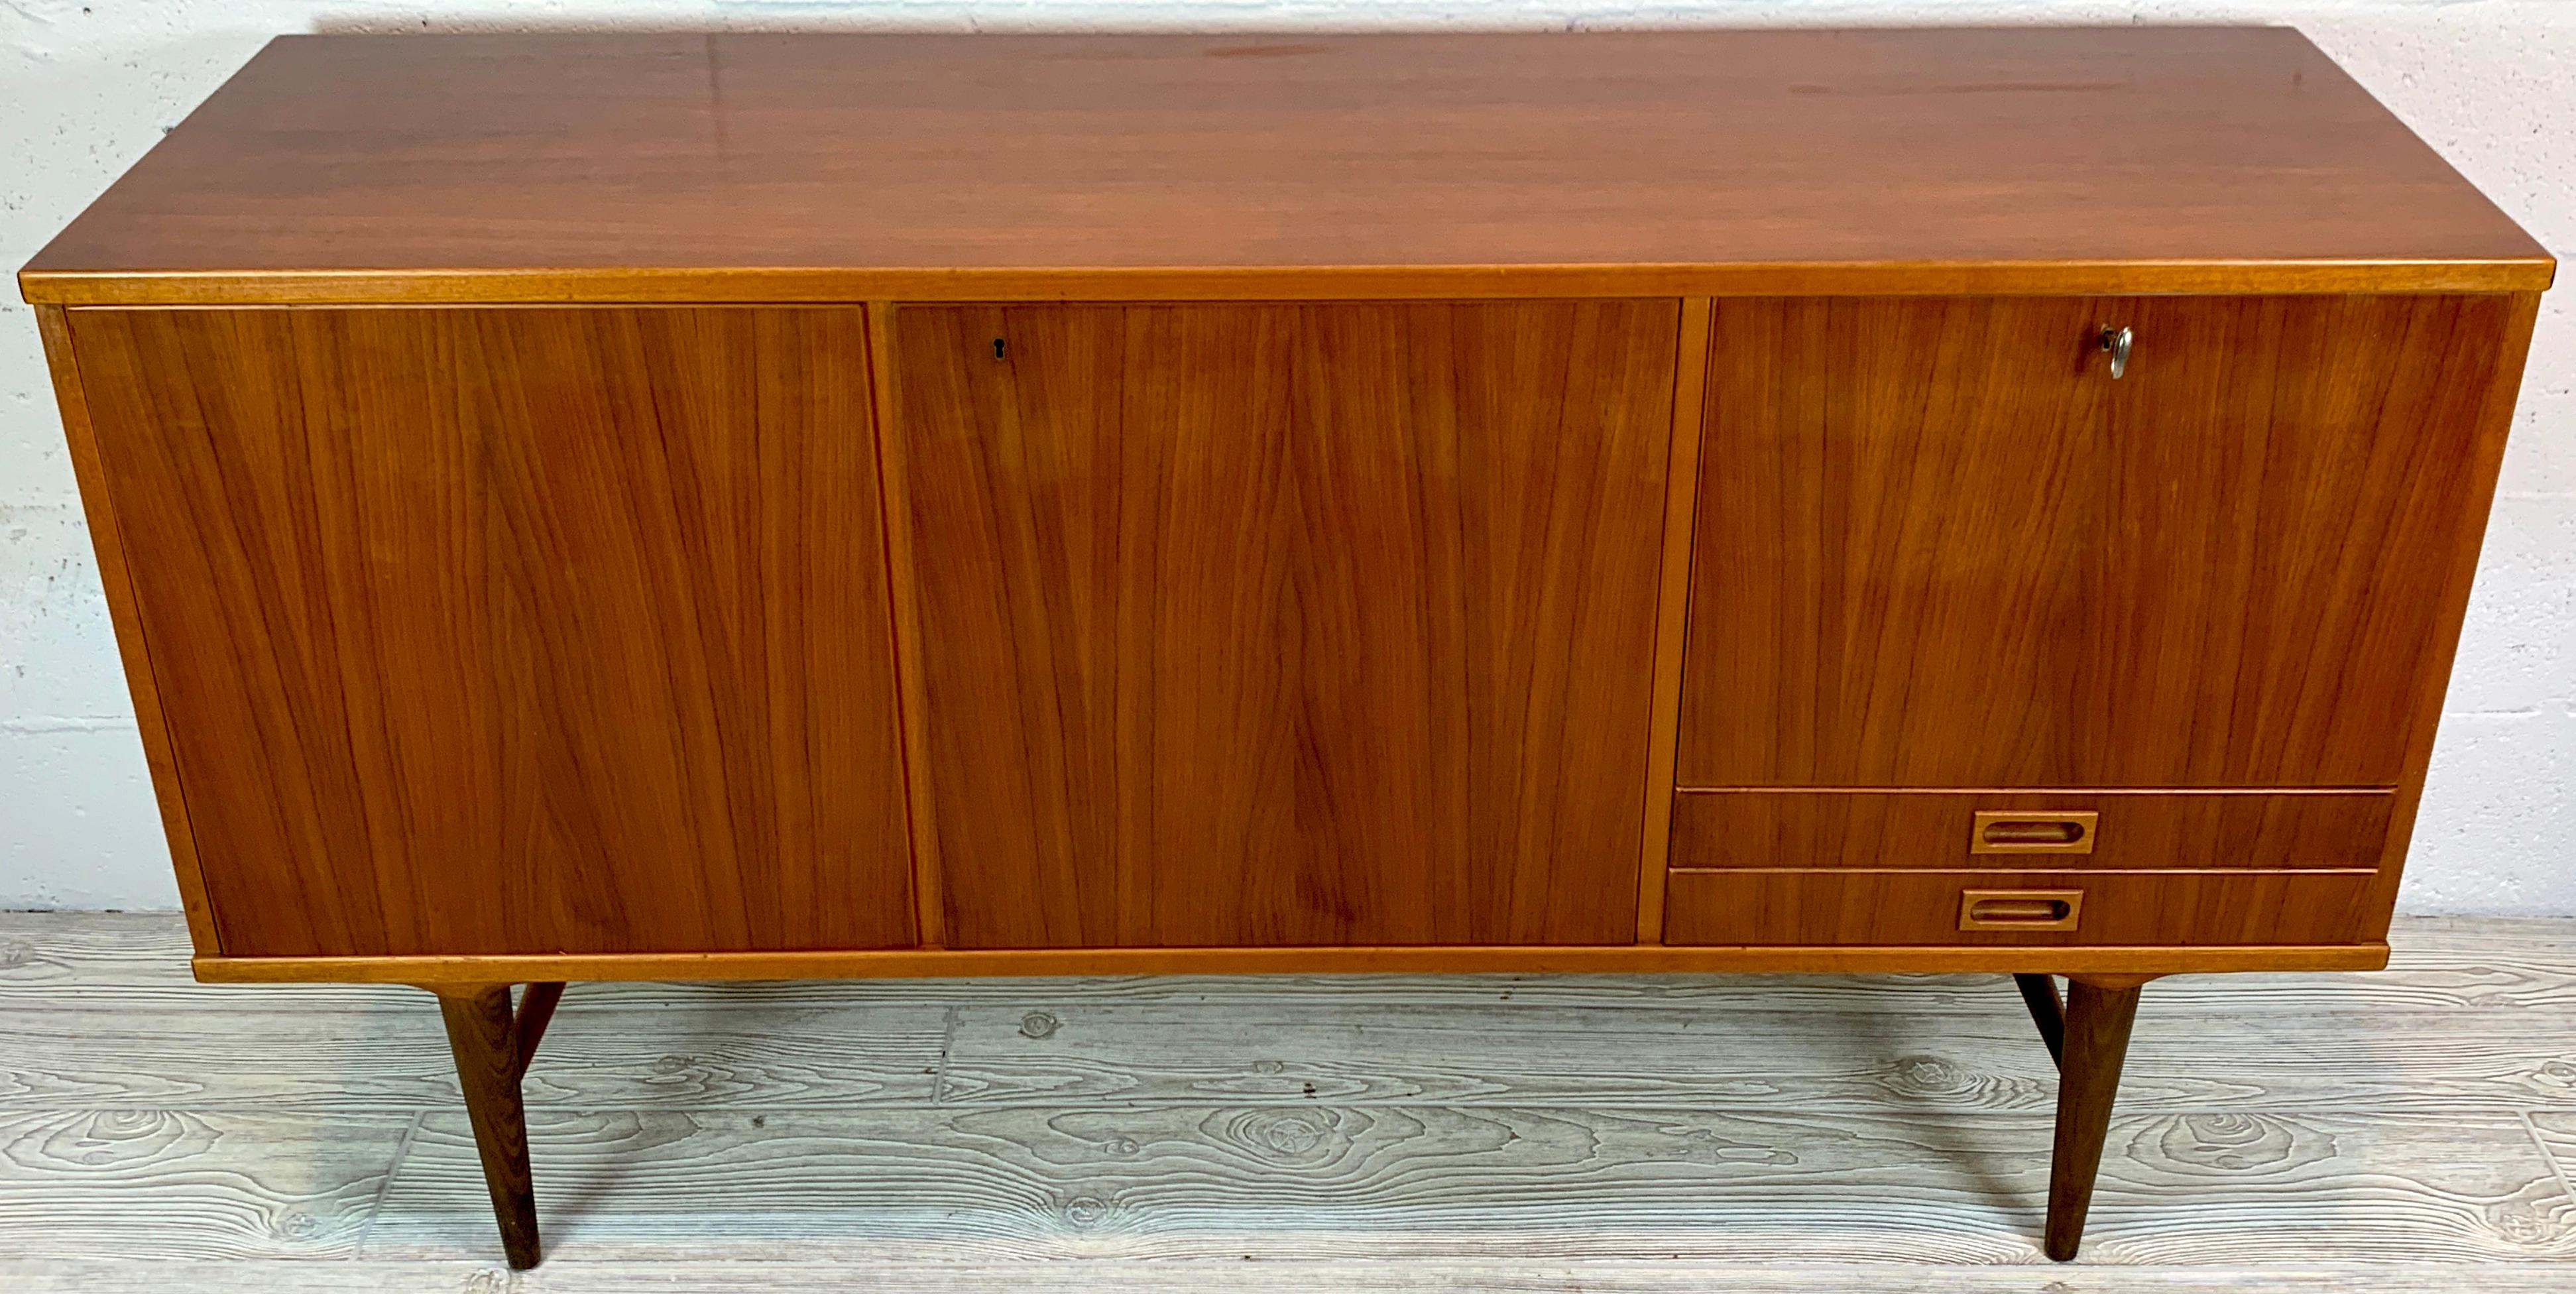 Danish modern Diminutive credenza, by Ib Kofod-Larsen, of rectangular form, The right side fitted with one drop front cabinet 17.5